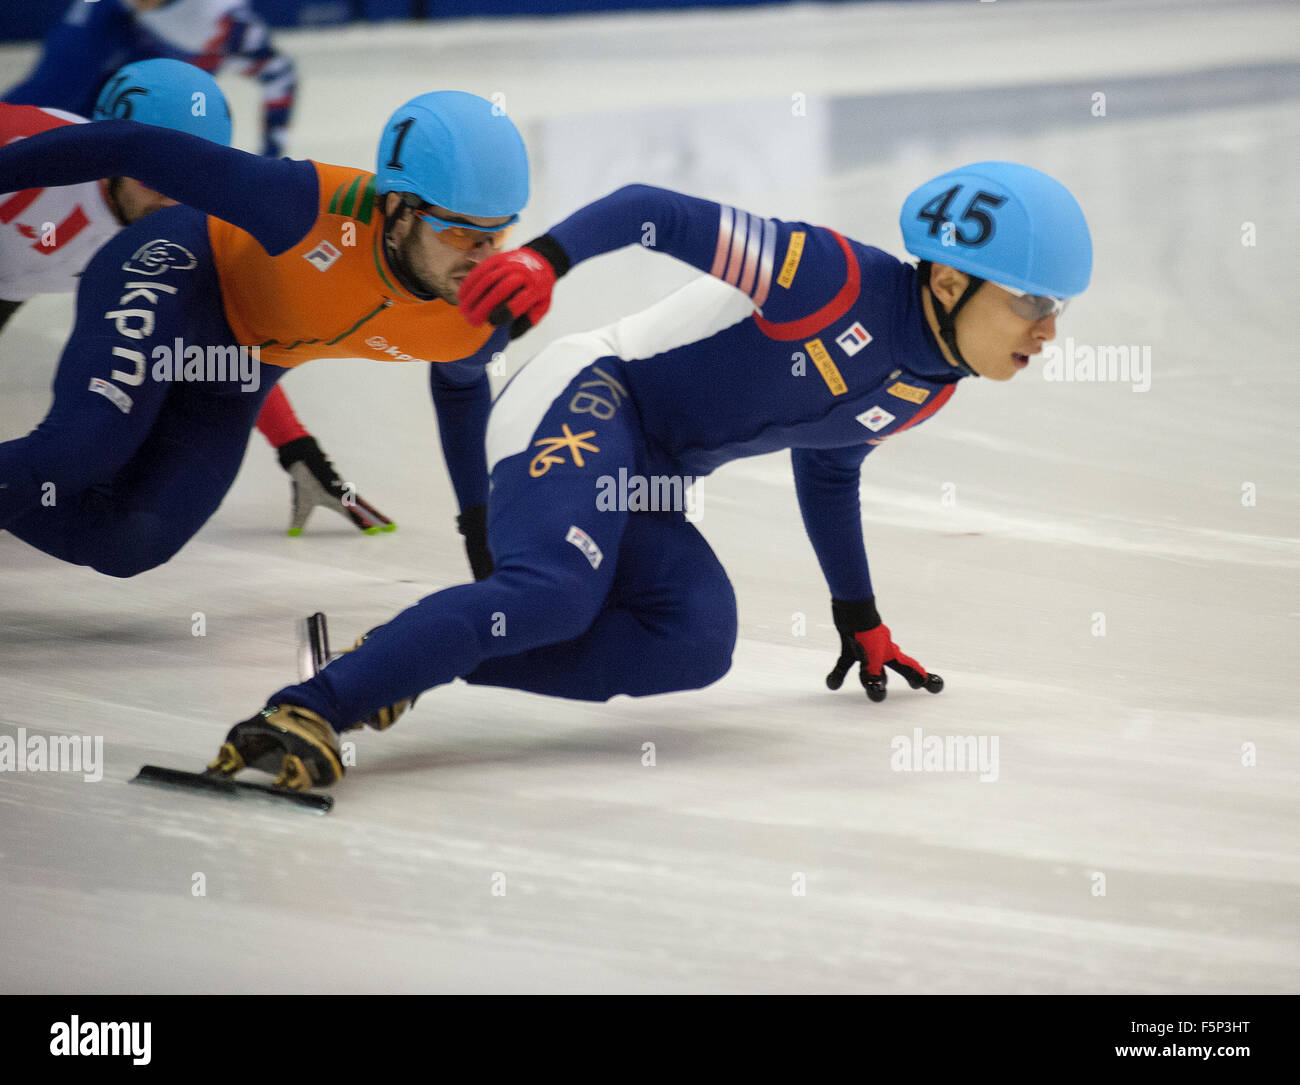 Toronto, Canada. 7 November 2015: ISU World Cup Short Track, Toronto - Yoon-Gy Kwak (45) (KOR) leads Sjinkie Knelt (1) NED) on his way to victory in the men's 1500m final. Photo: Peter Llewellyn/Alamy Live News Stock Photo